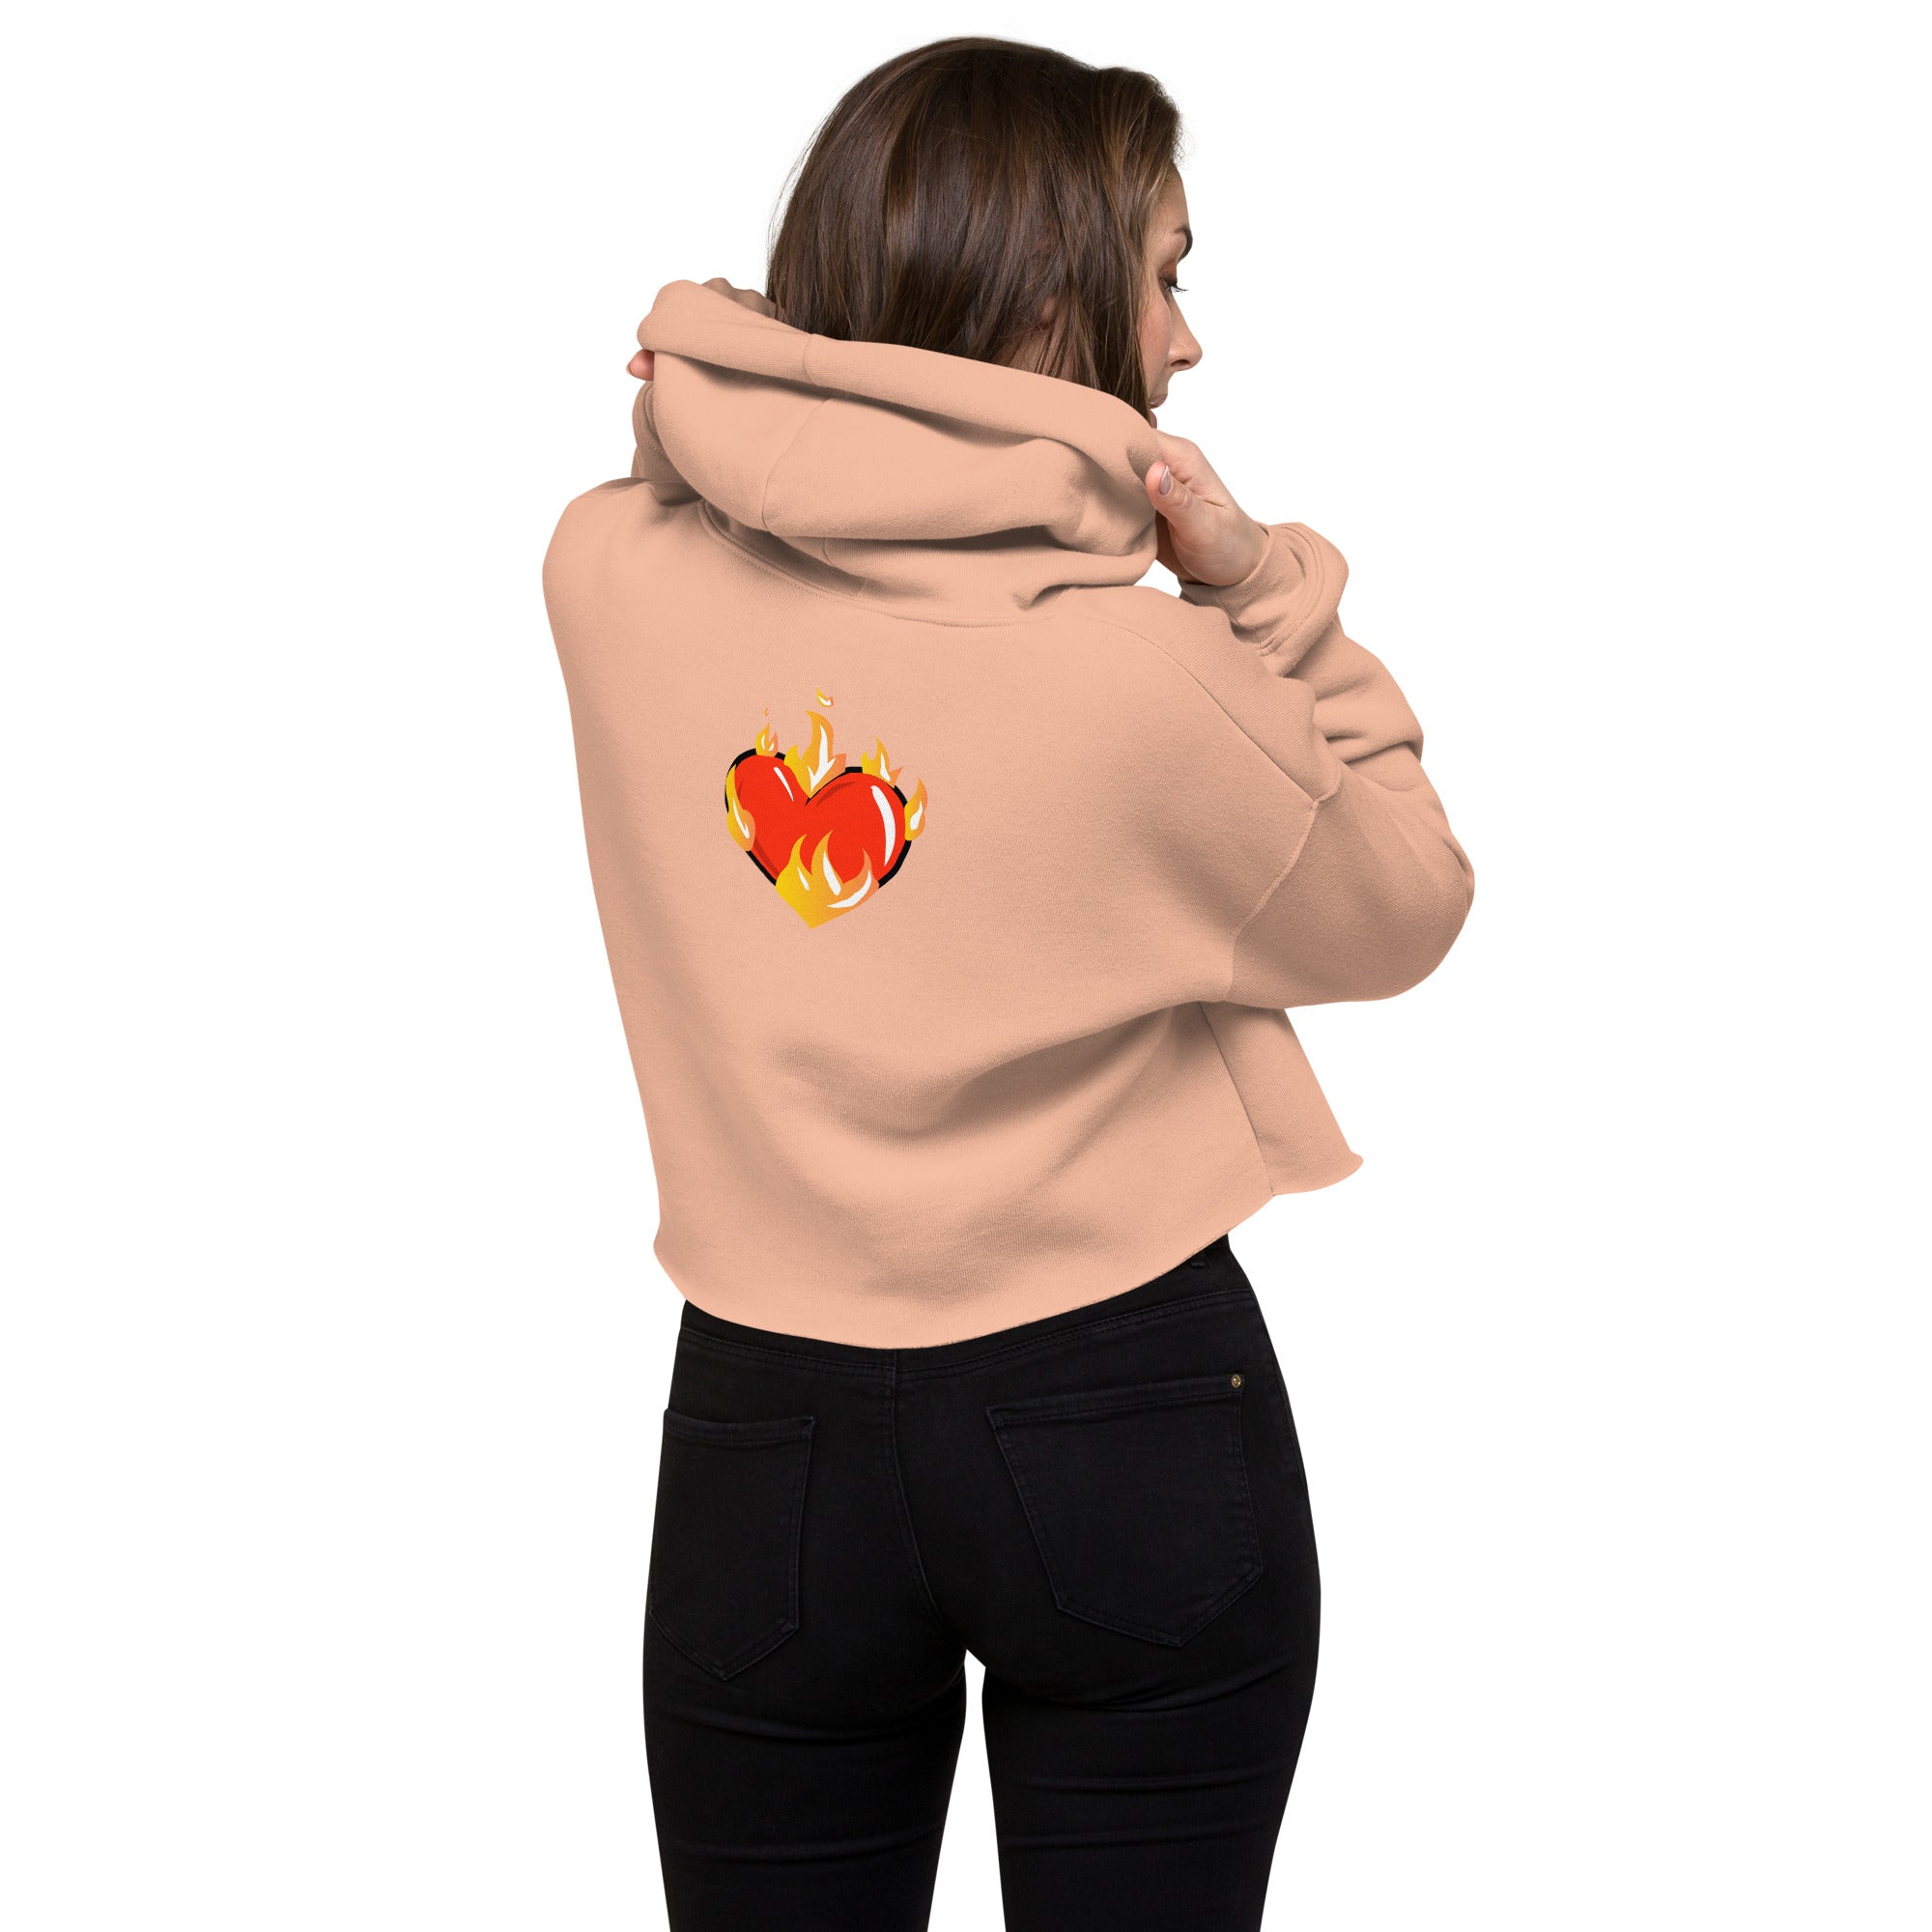 Women’s Novelty Crop Hoodie Graphic - Heart on Fire Front and Back